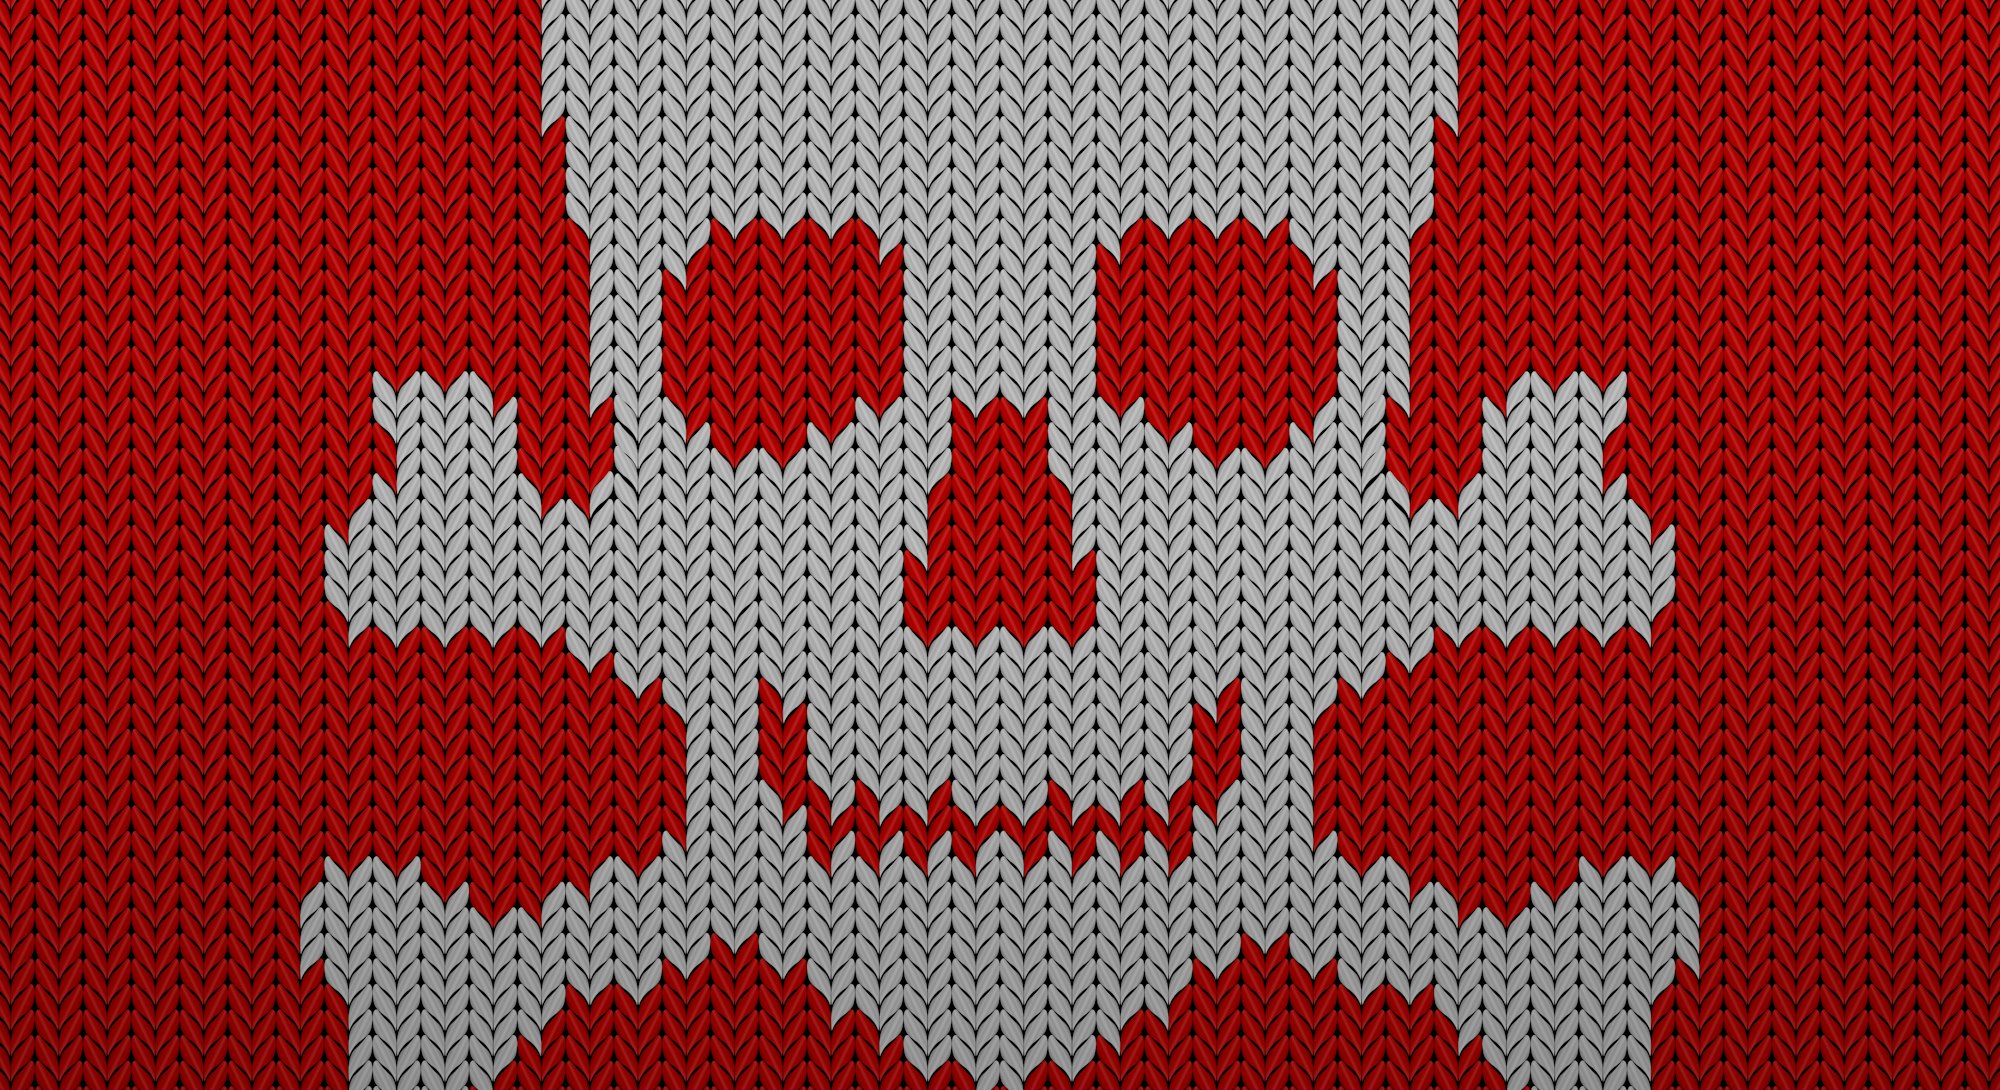 Knitted pattern background texture. Vector illustration.